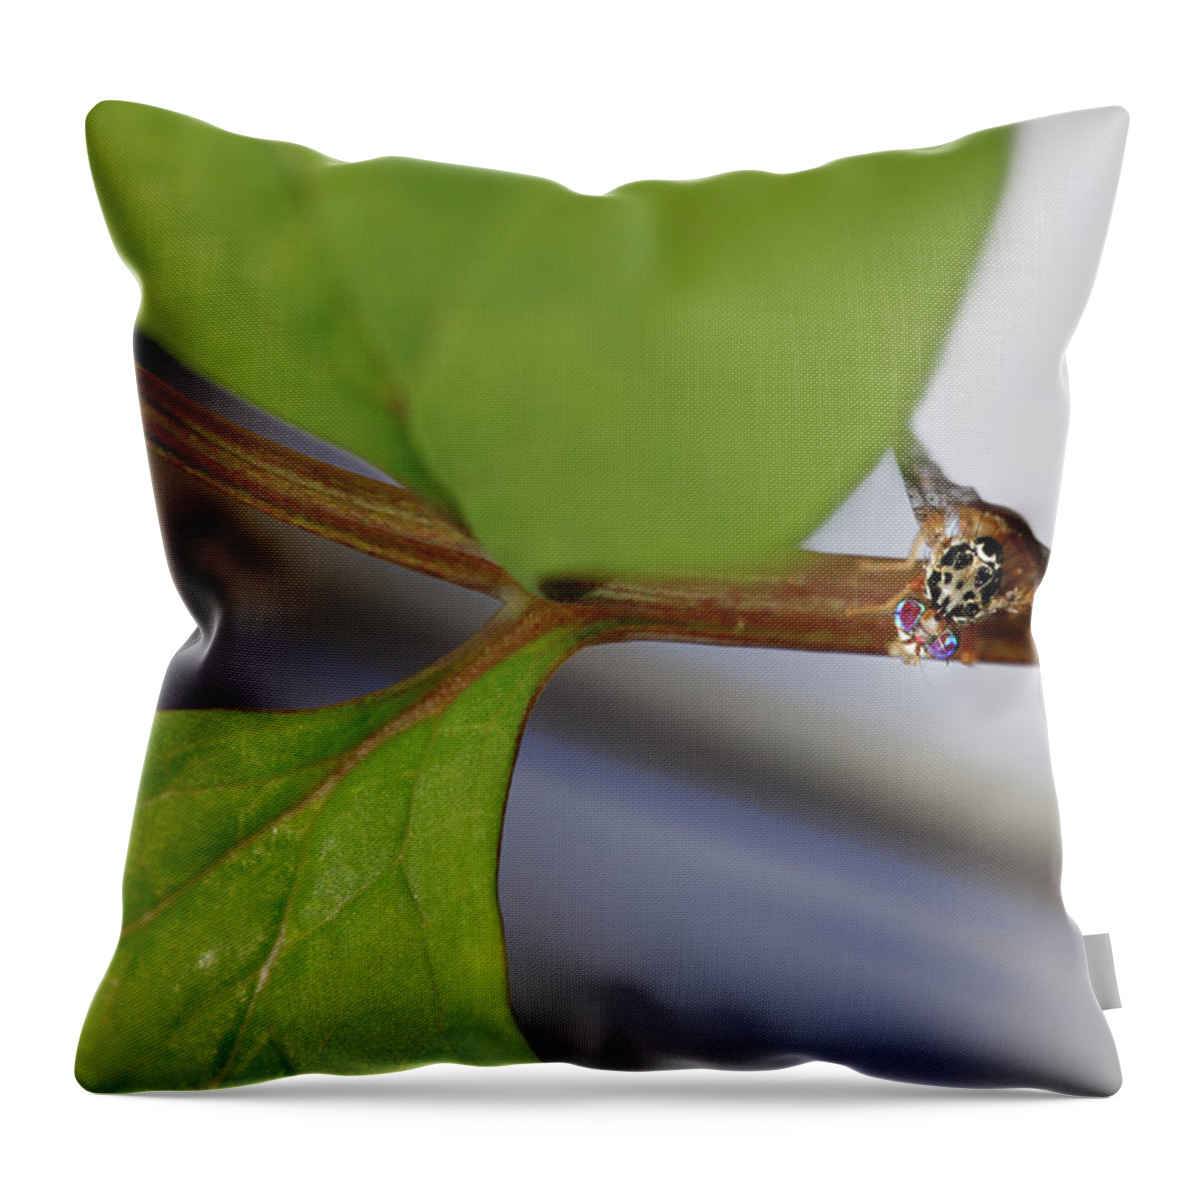 Insect Throw Pillow featuring the photograph Macro Of Colorful Flying Insect by Susangaryphotography